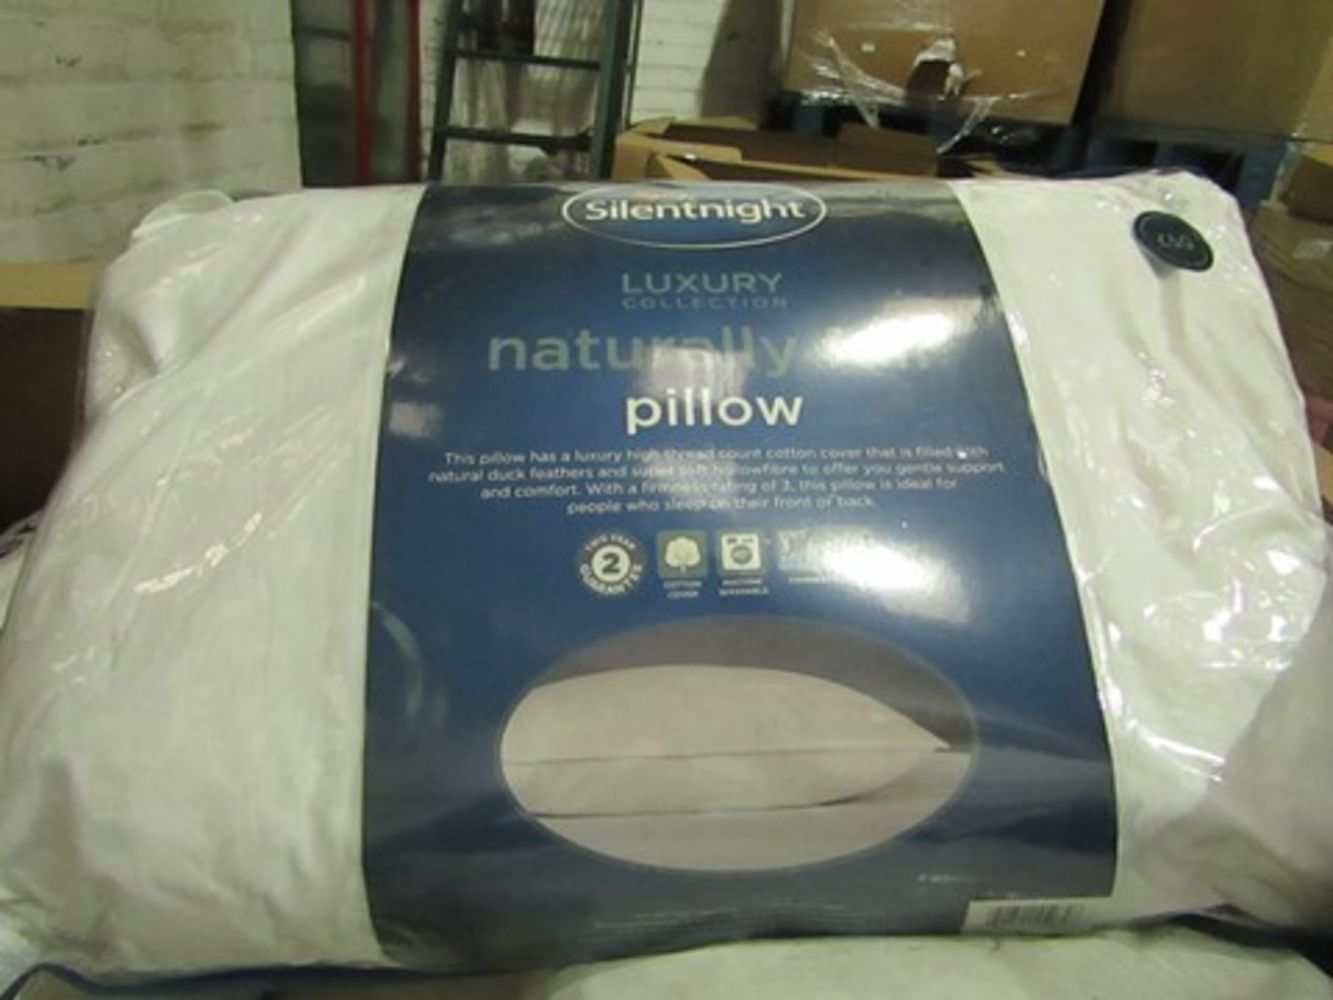 Brand New Pillow and Quilts from Silent Night